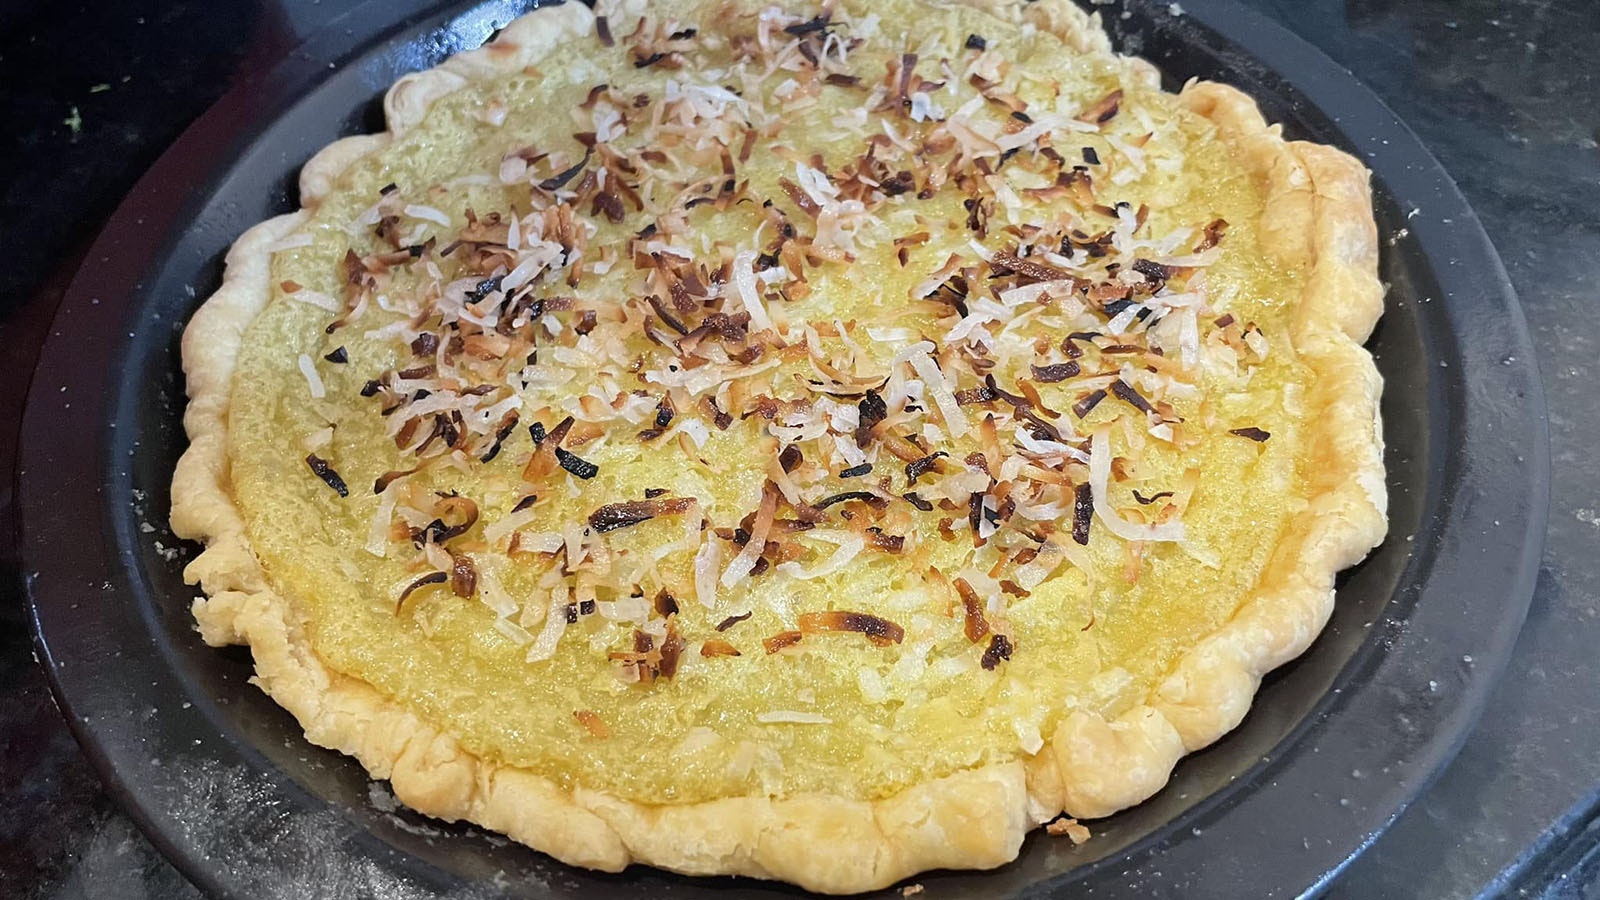 Lemon pie with toasted coconut.